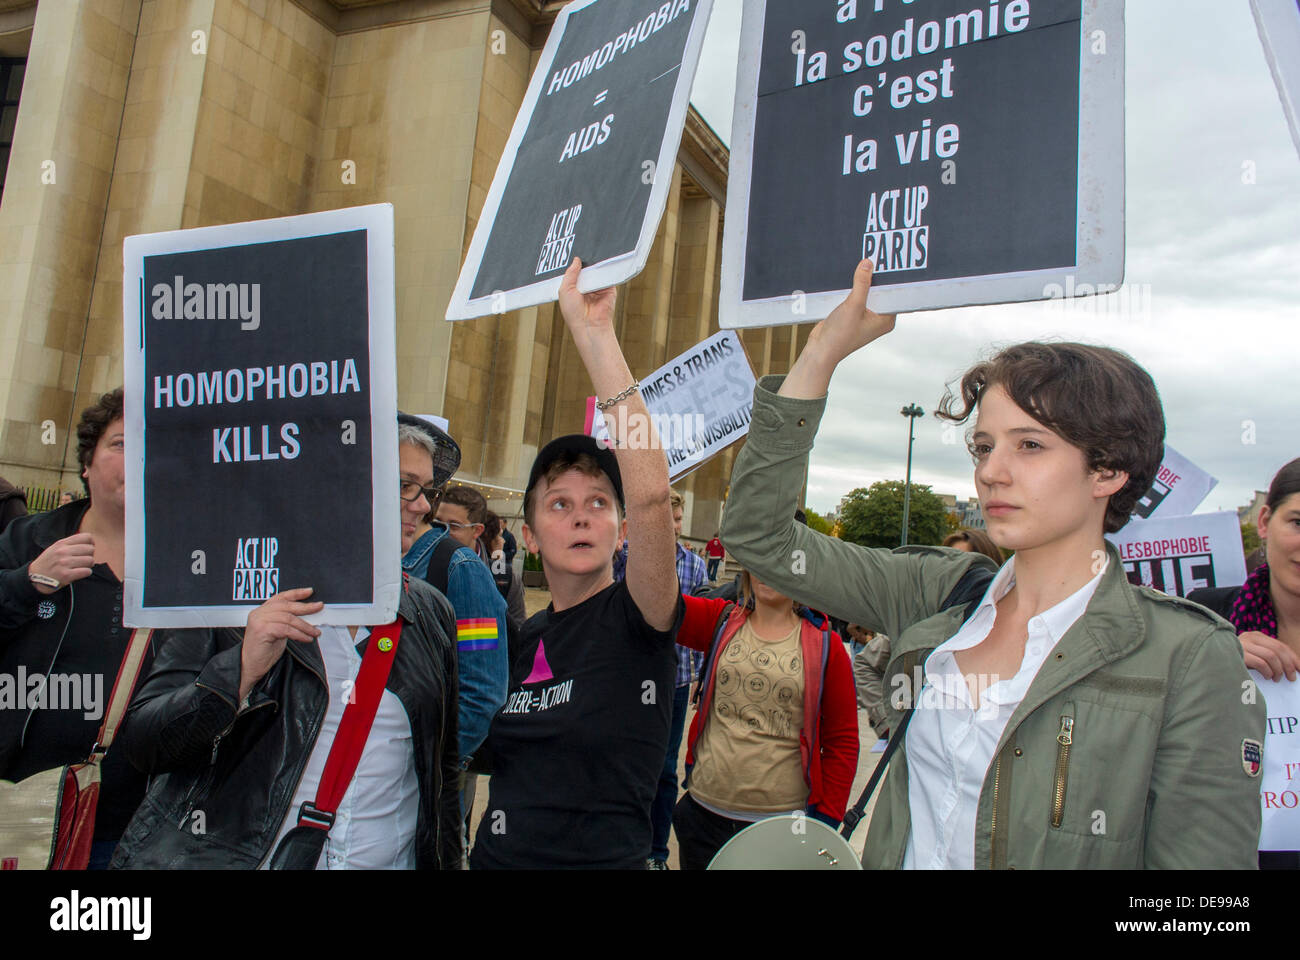 Paris, France. Several LGBT Groups (Act Up-Paris) held an Anti-Homophobia Law, in Russia, Demonstration, (Cecile and Liliane) French Activist protest poster, violence against gay men, lgbtq protesters women with signs Stock Photo